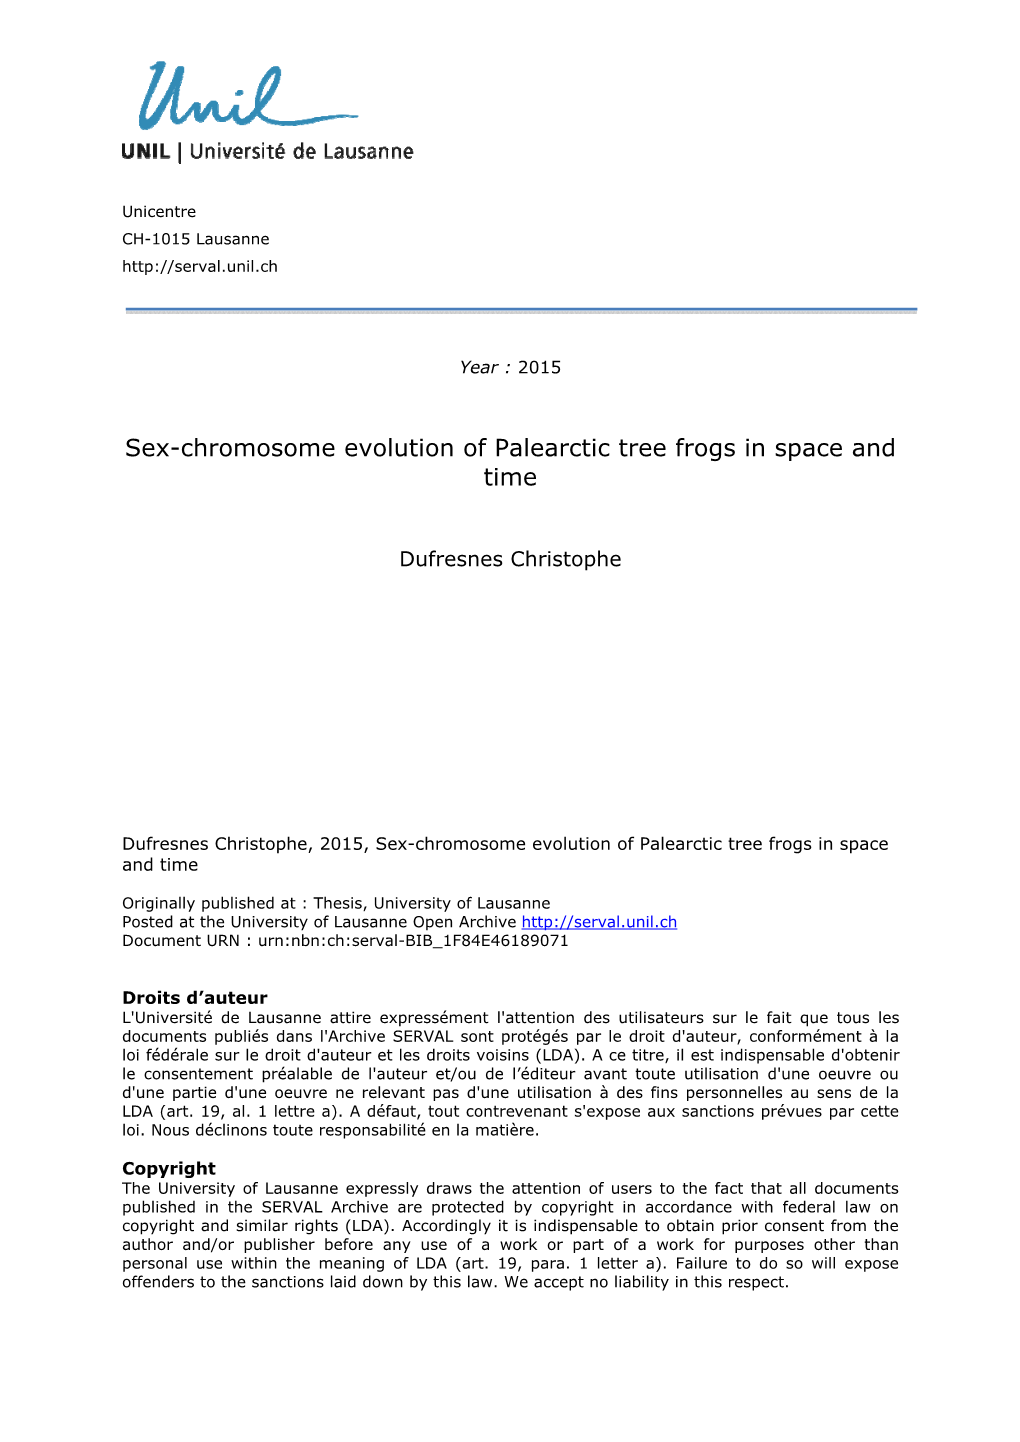 Sex-Chromosome Evolution of Palearctic Tree Frogs in Space and Time